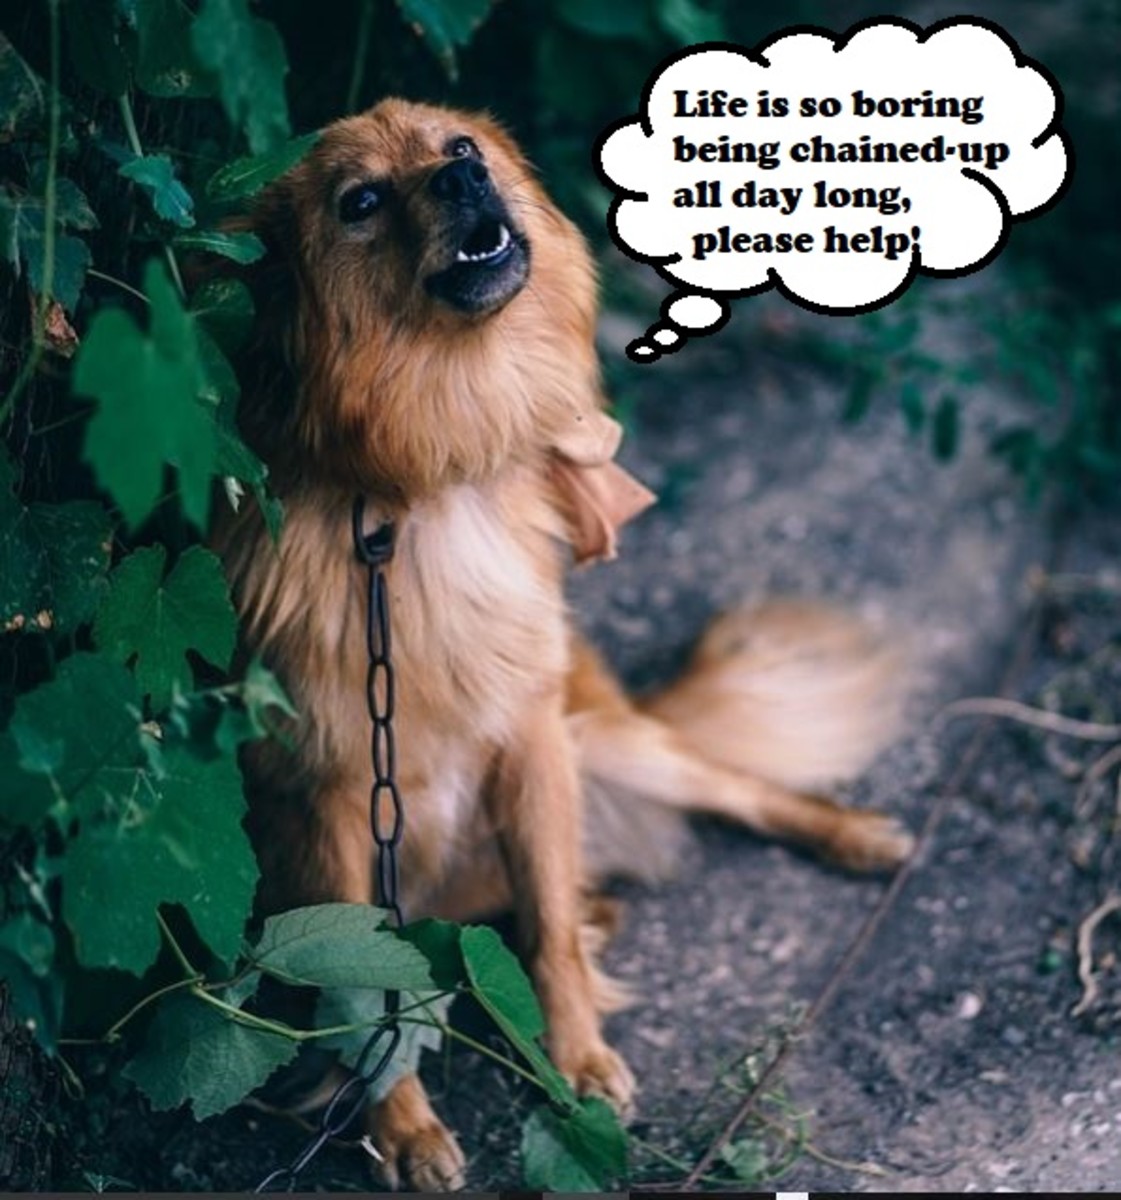 Boredom barking allows the dog to "vent" off unmet needs.